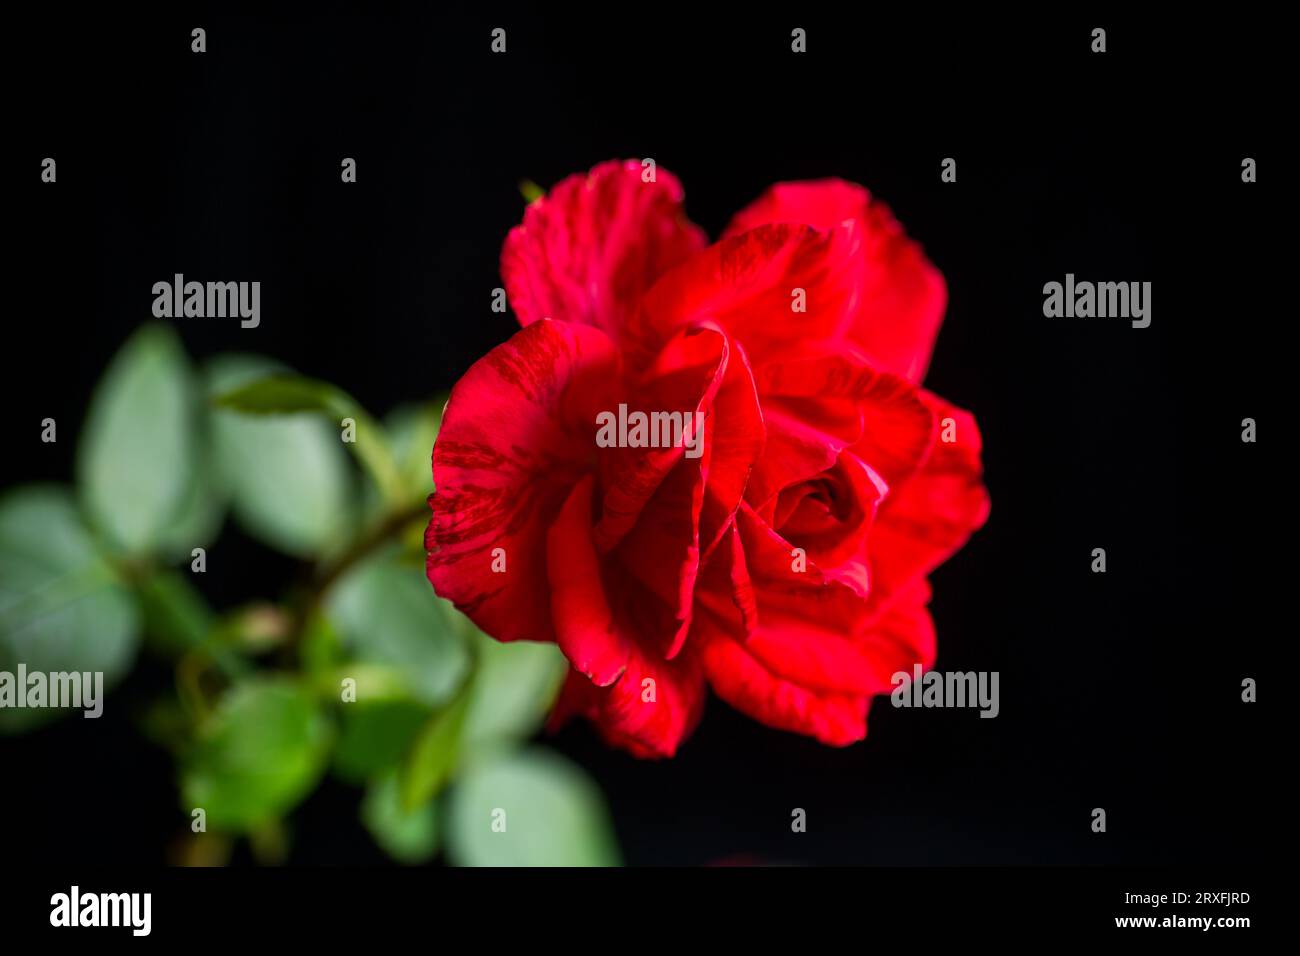 Flowers of beautiful blooming red rose isolated on black background. Stock Photo